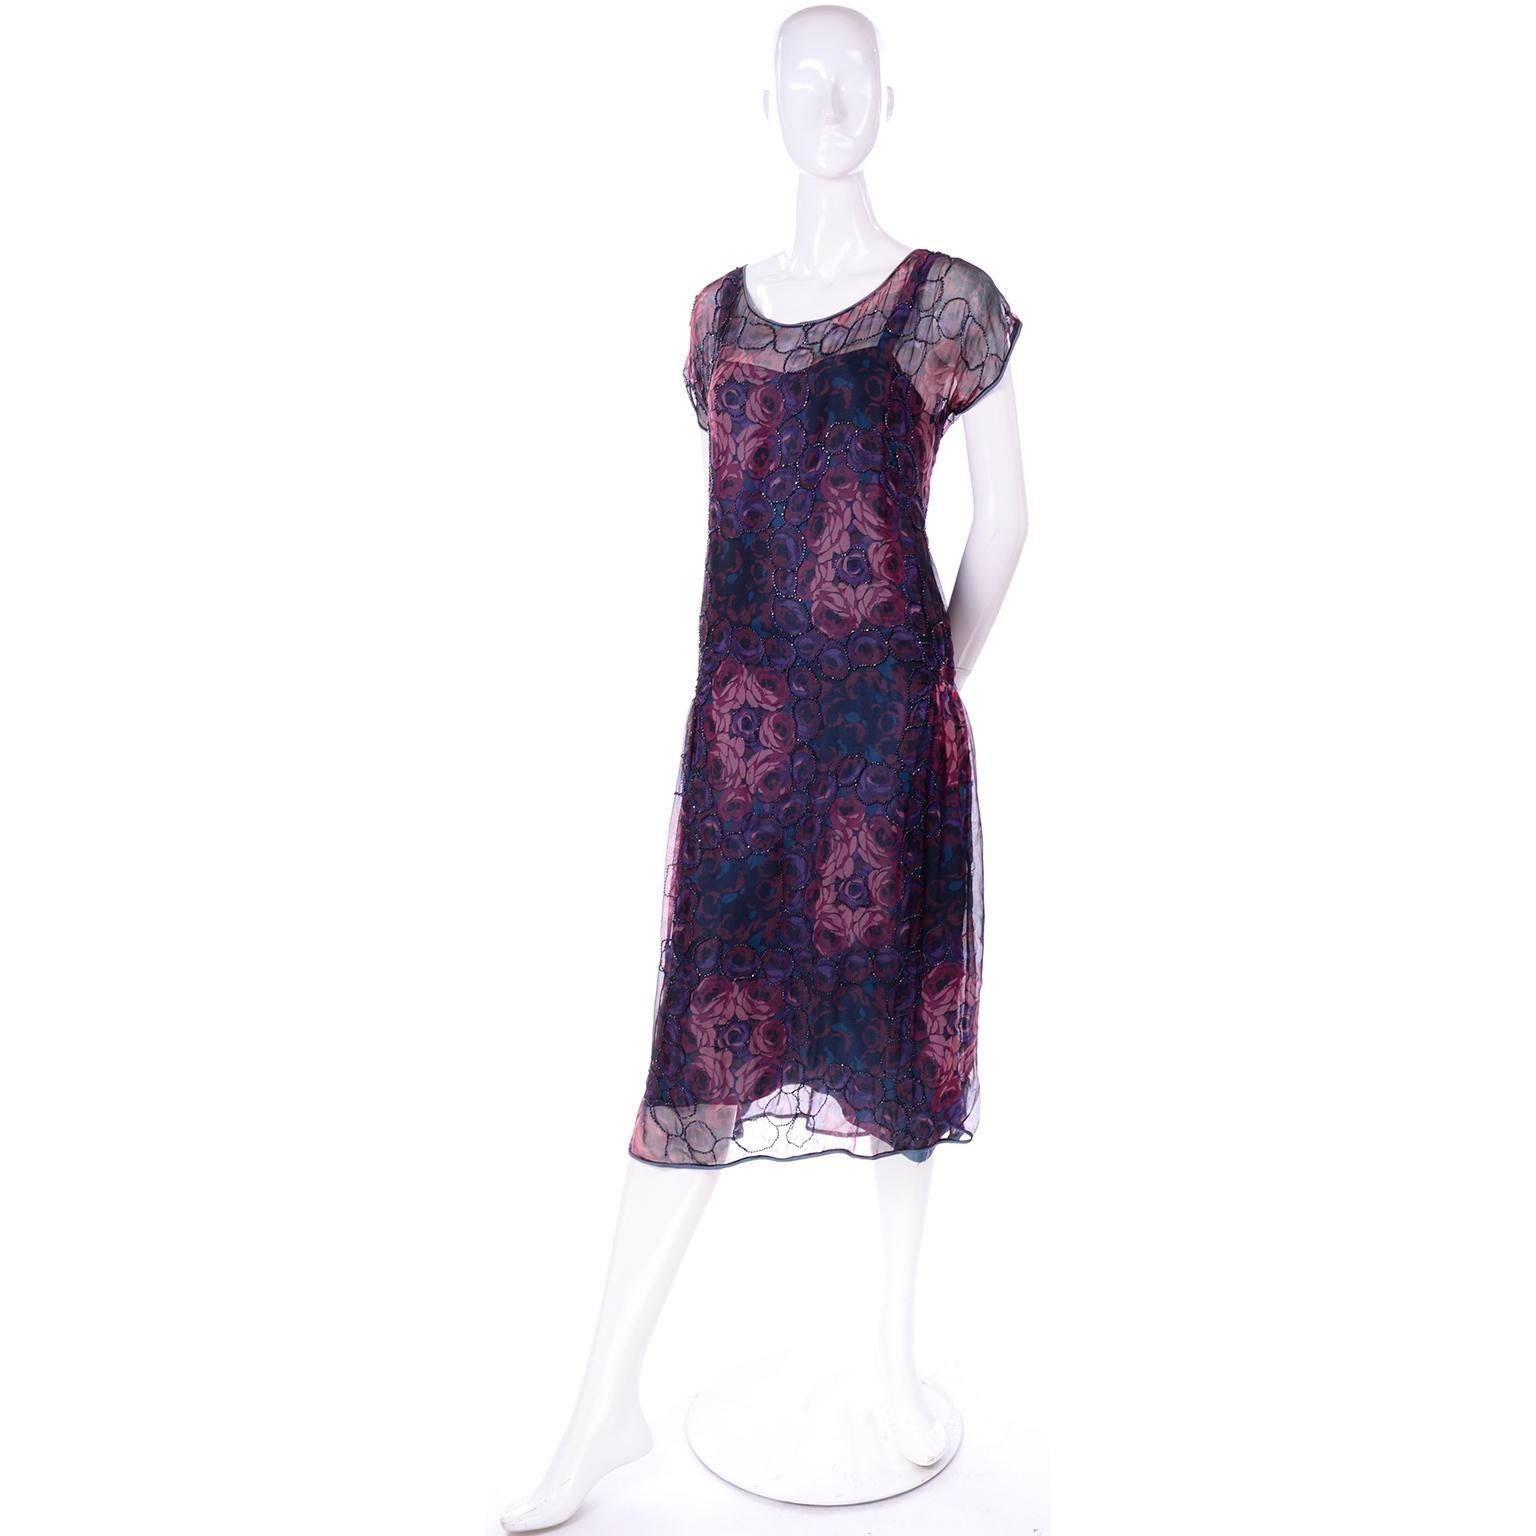 This is a lovely sheer floral 1920's dress with black faceted beading around swirls of pink and purple roses. This pretty 20's dress has pale blue trim and an attached blue silk slip under-dress that shows through the slit in the side of the outer